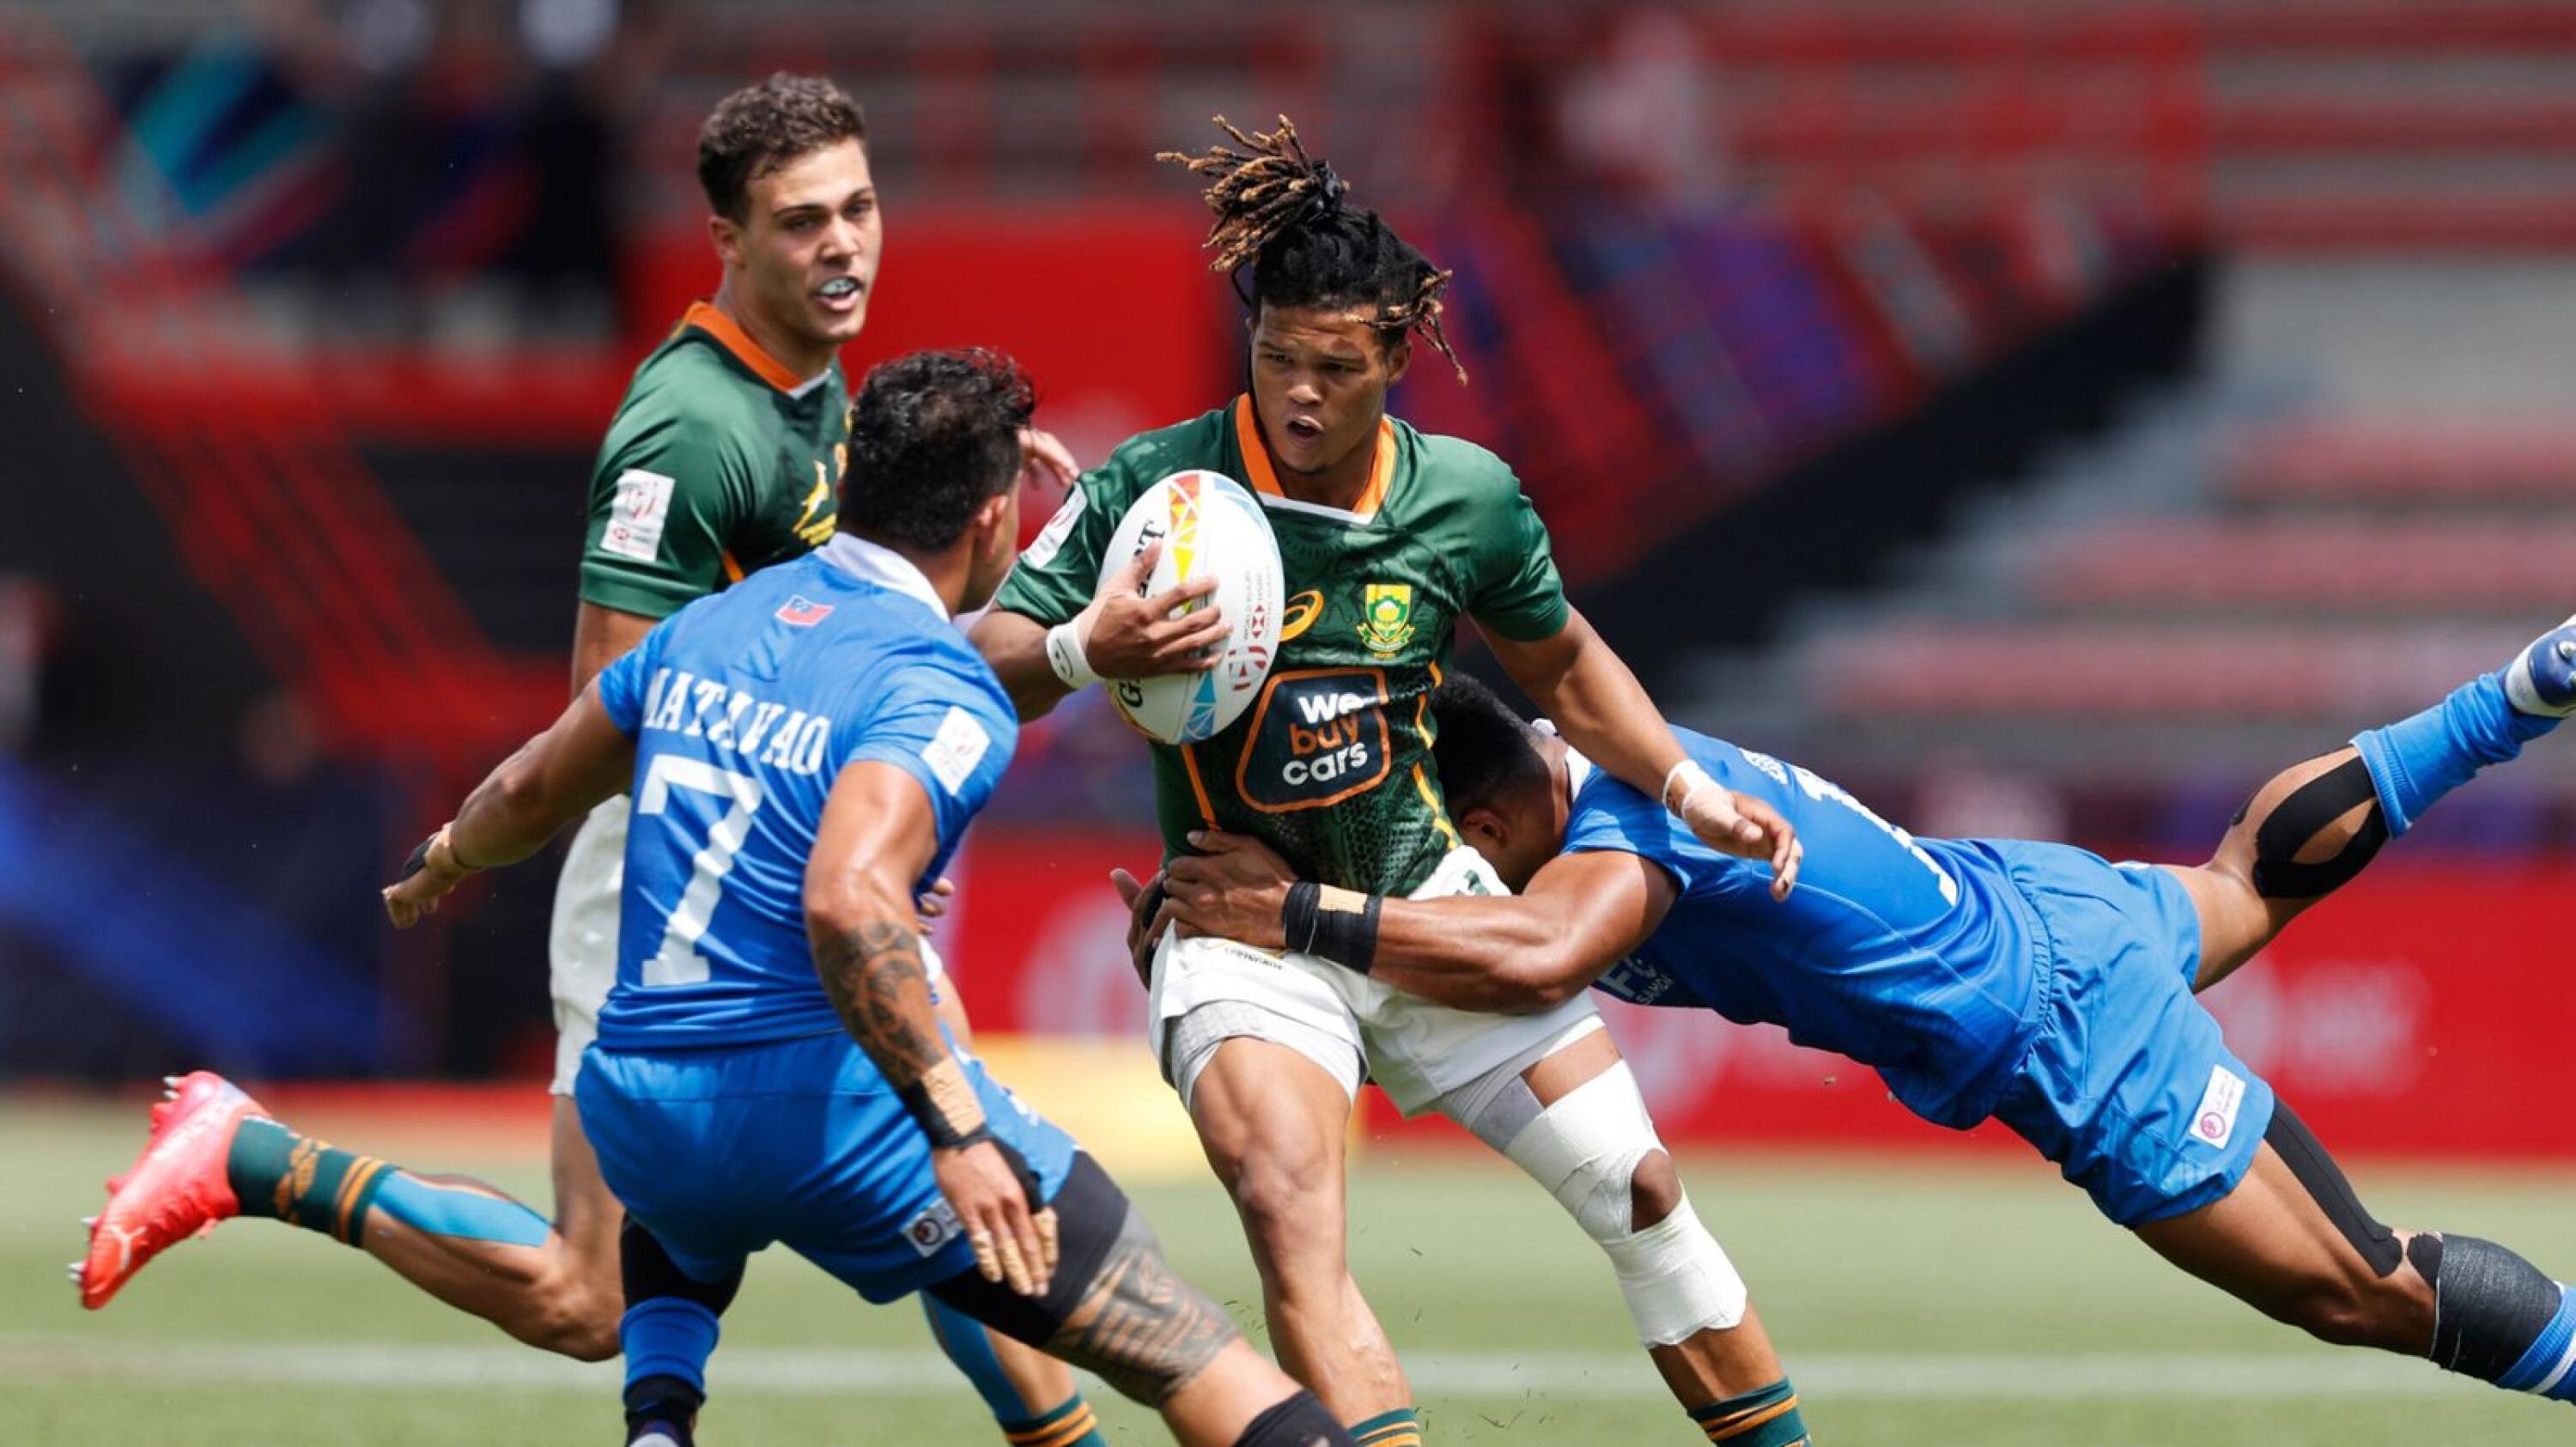 South Africa's Dewald Human charges through the Samoa defense on day two of the HSBC France Sevens men's competition at Stade Toulousain in Toulouse, France on Saturday